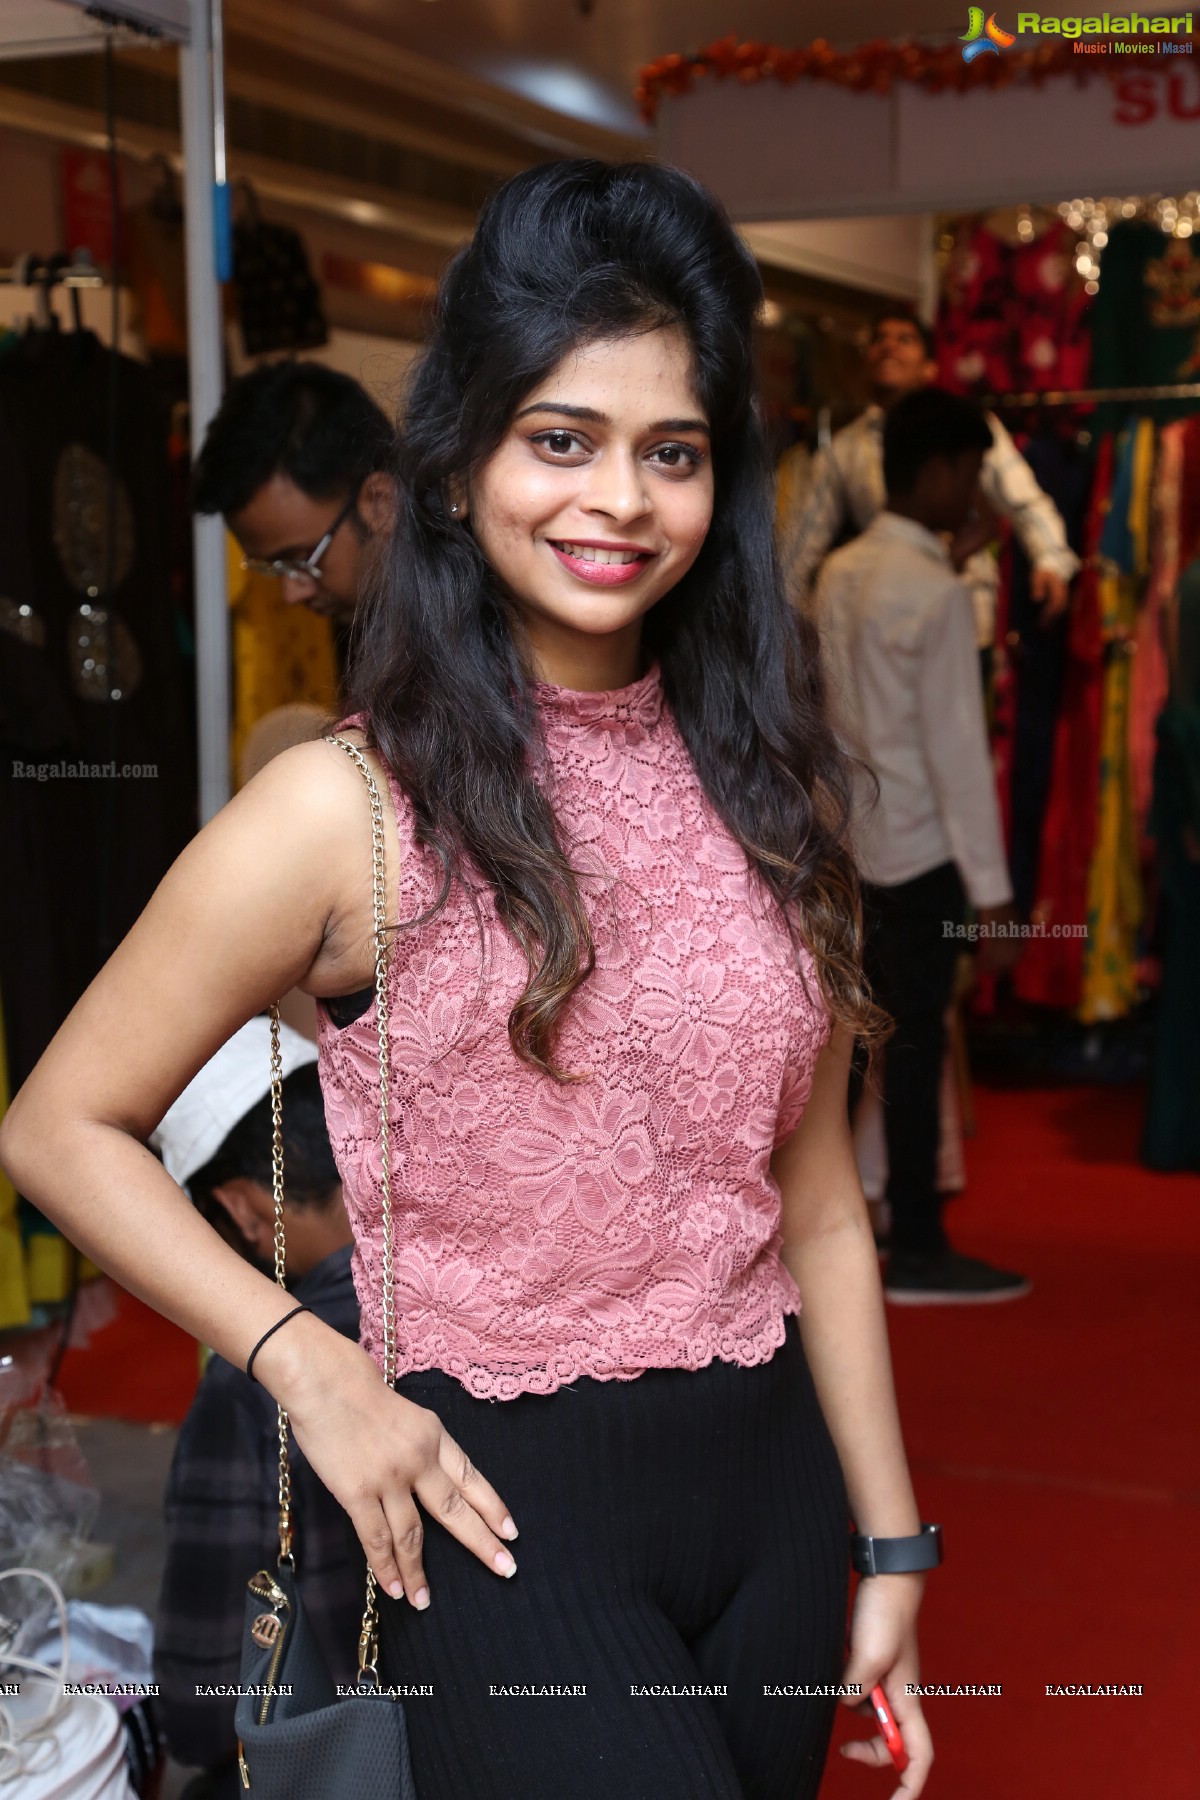 Harshitha Ajmira at Style Bazaar Exhibition and Sale